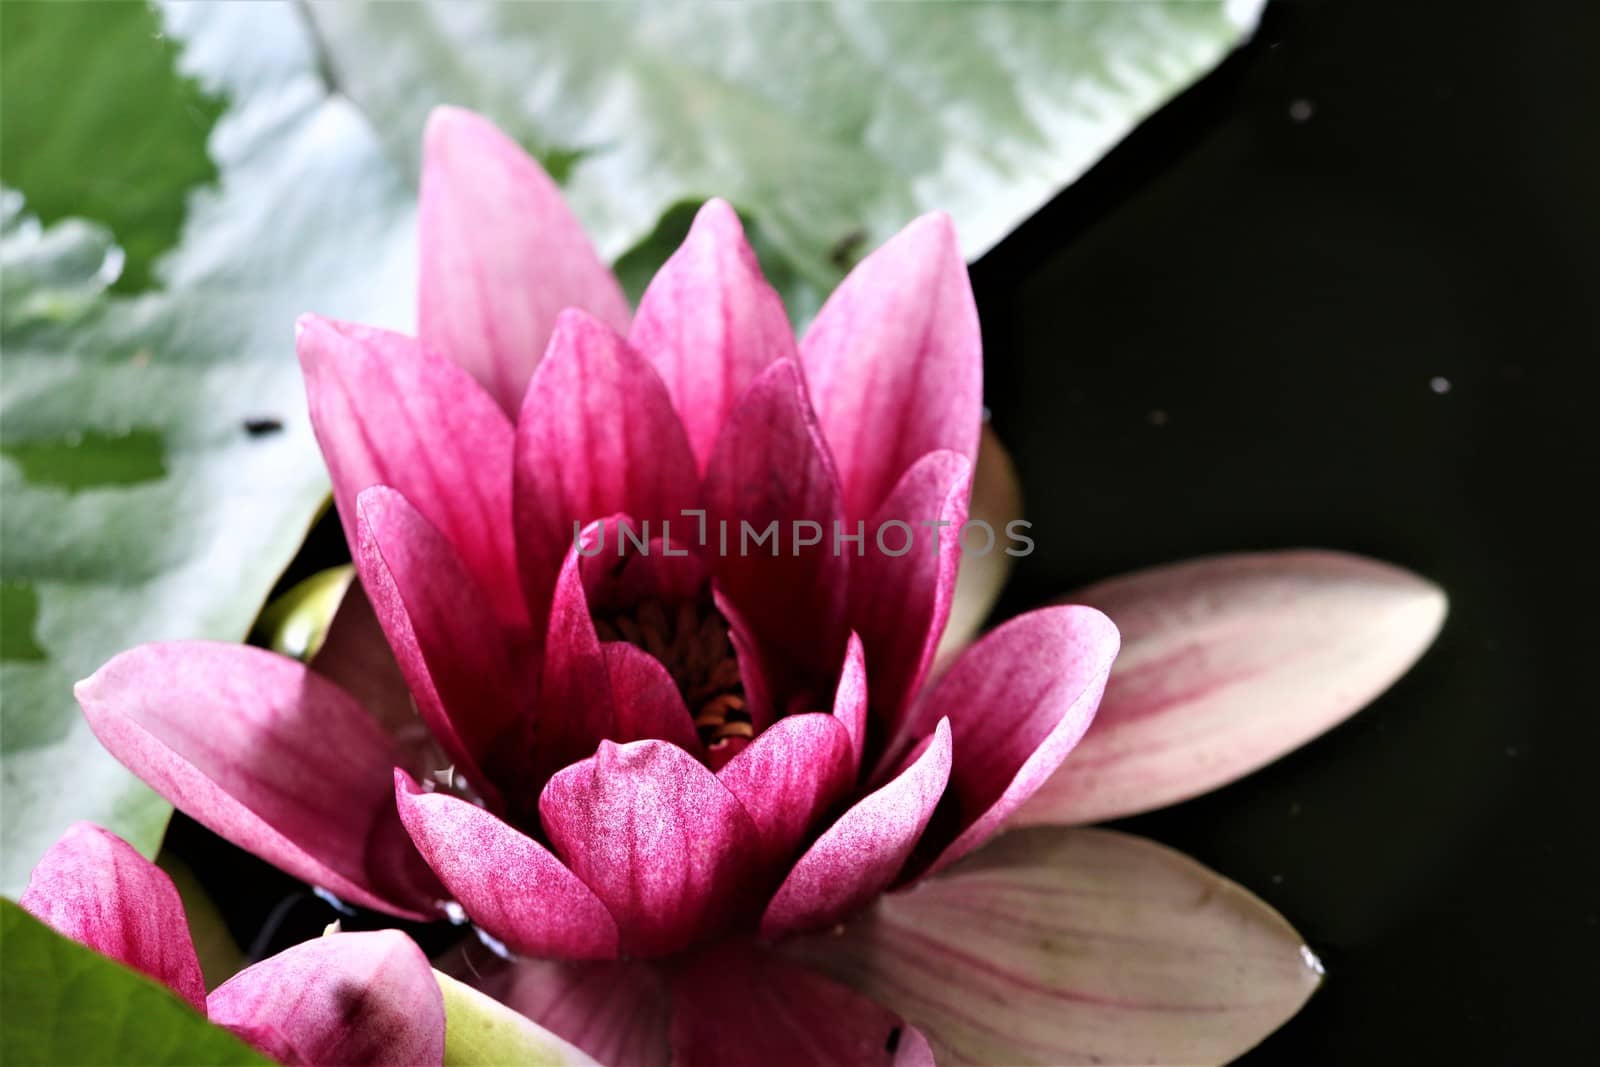 A close-up of a pink water lily with green leaf